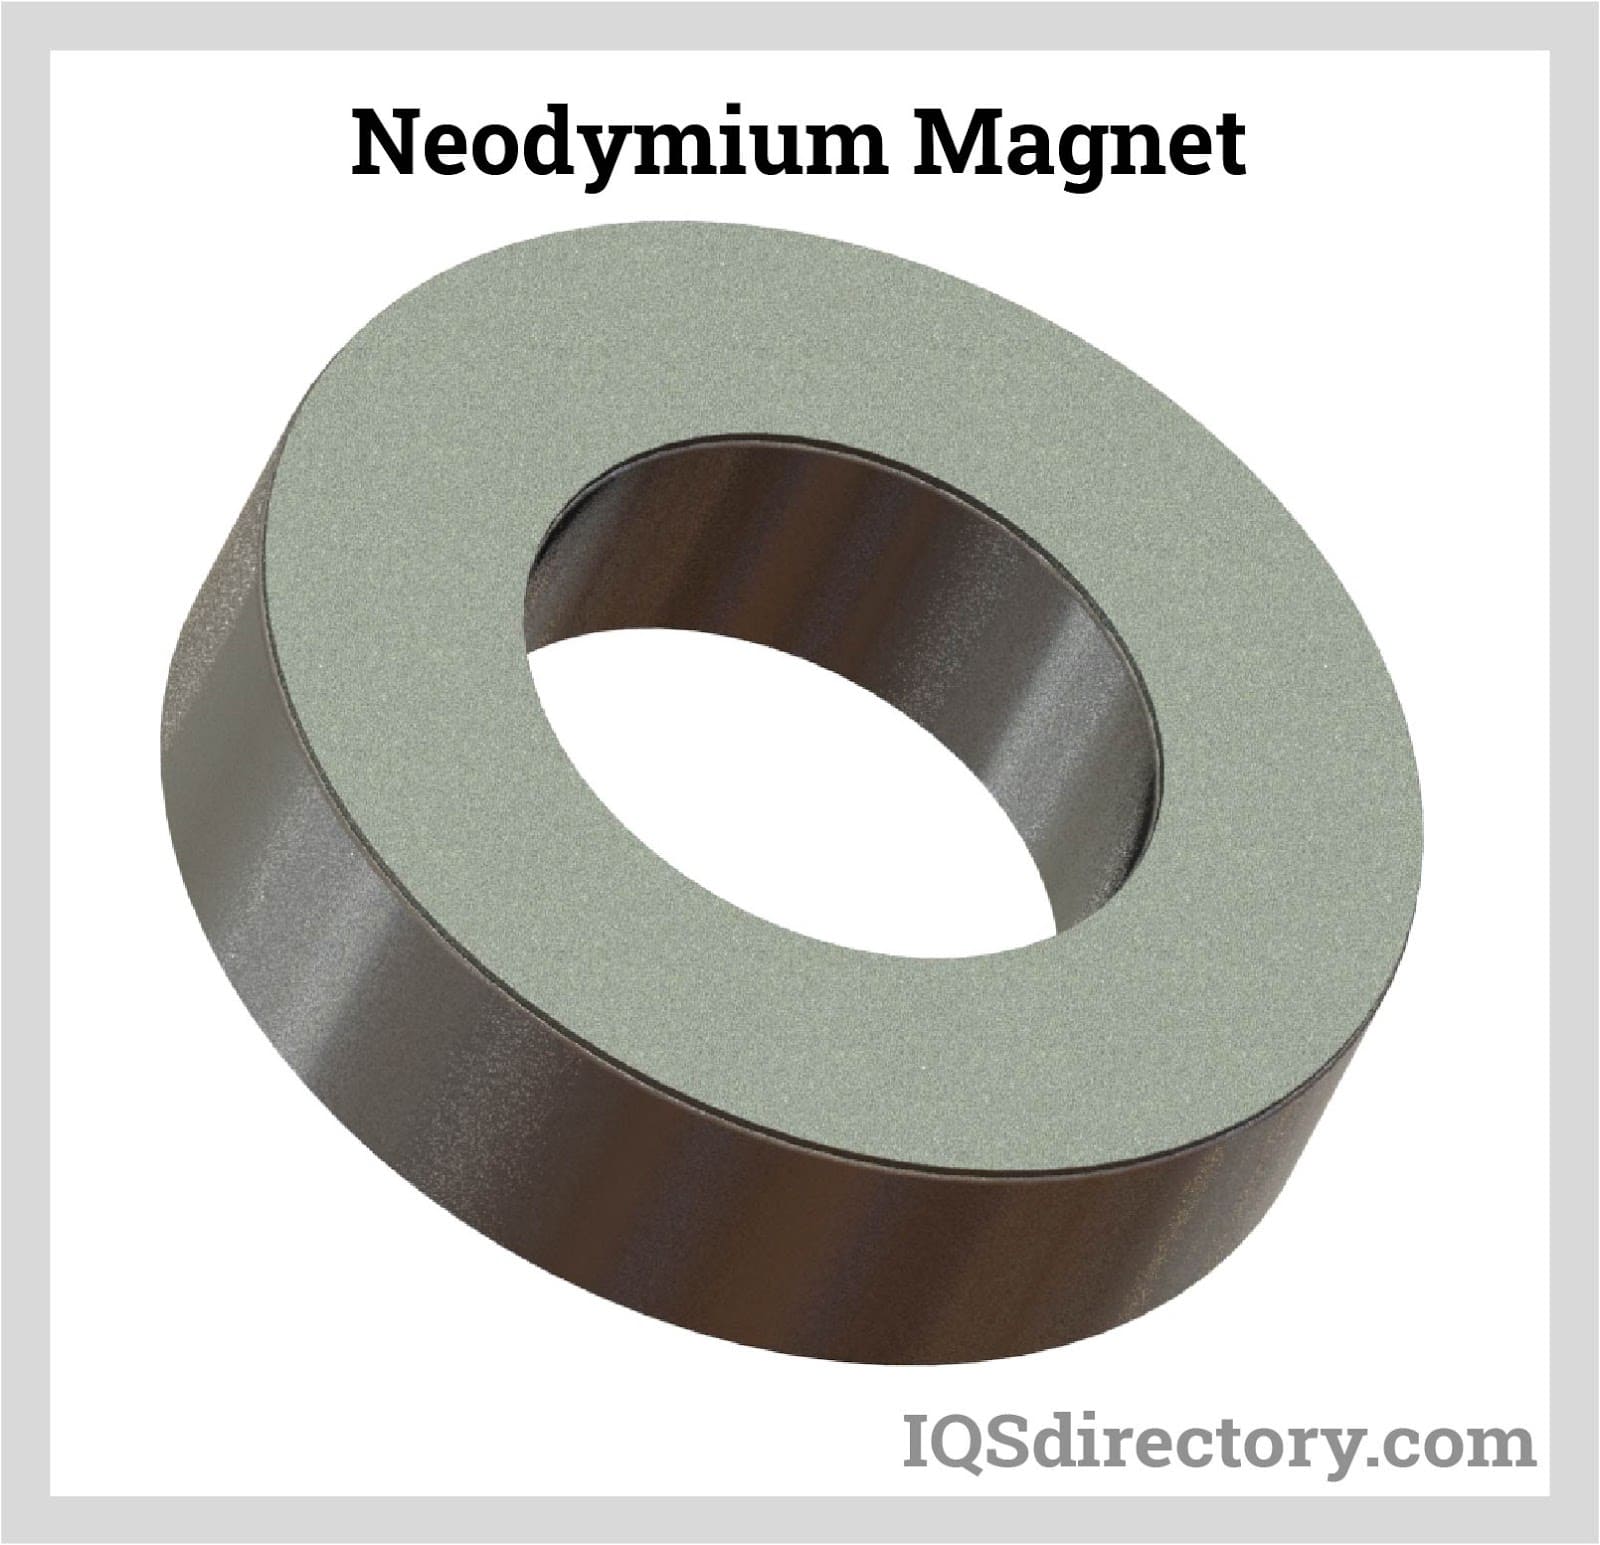 Neodymium Magnet: What is it, Applications & Regulations